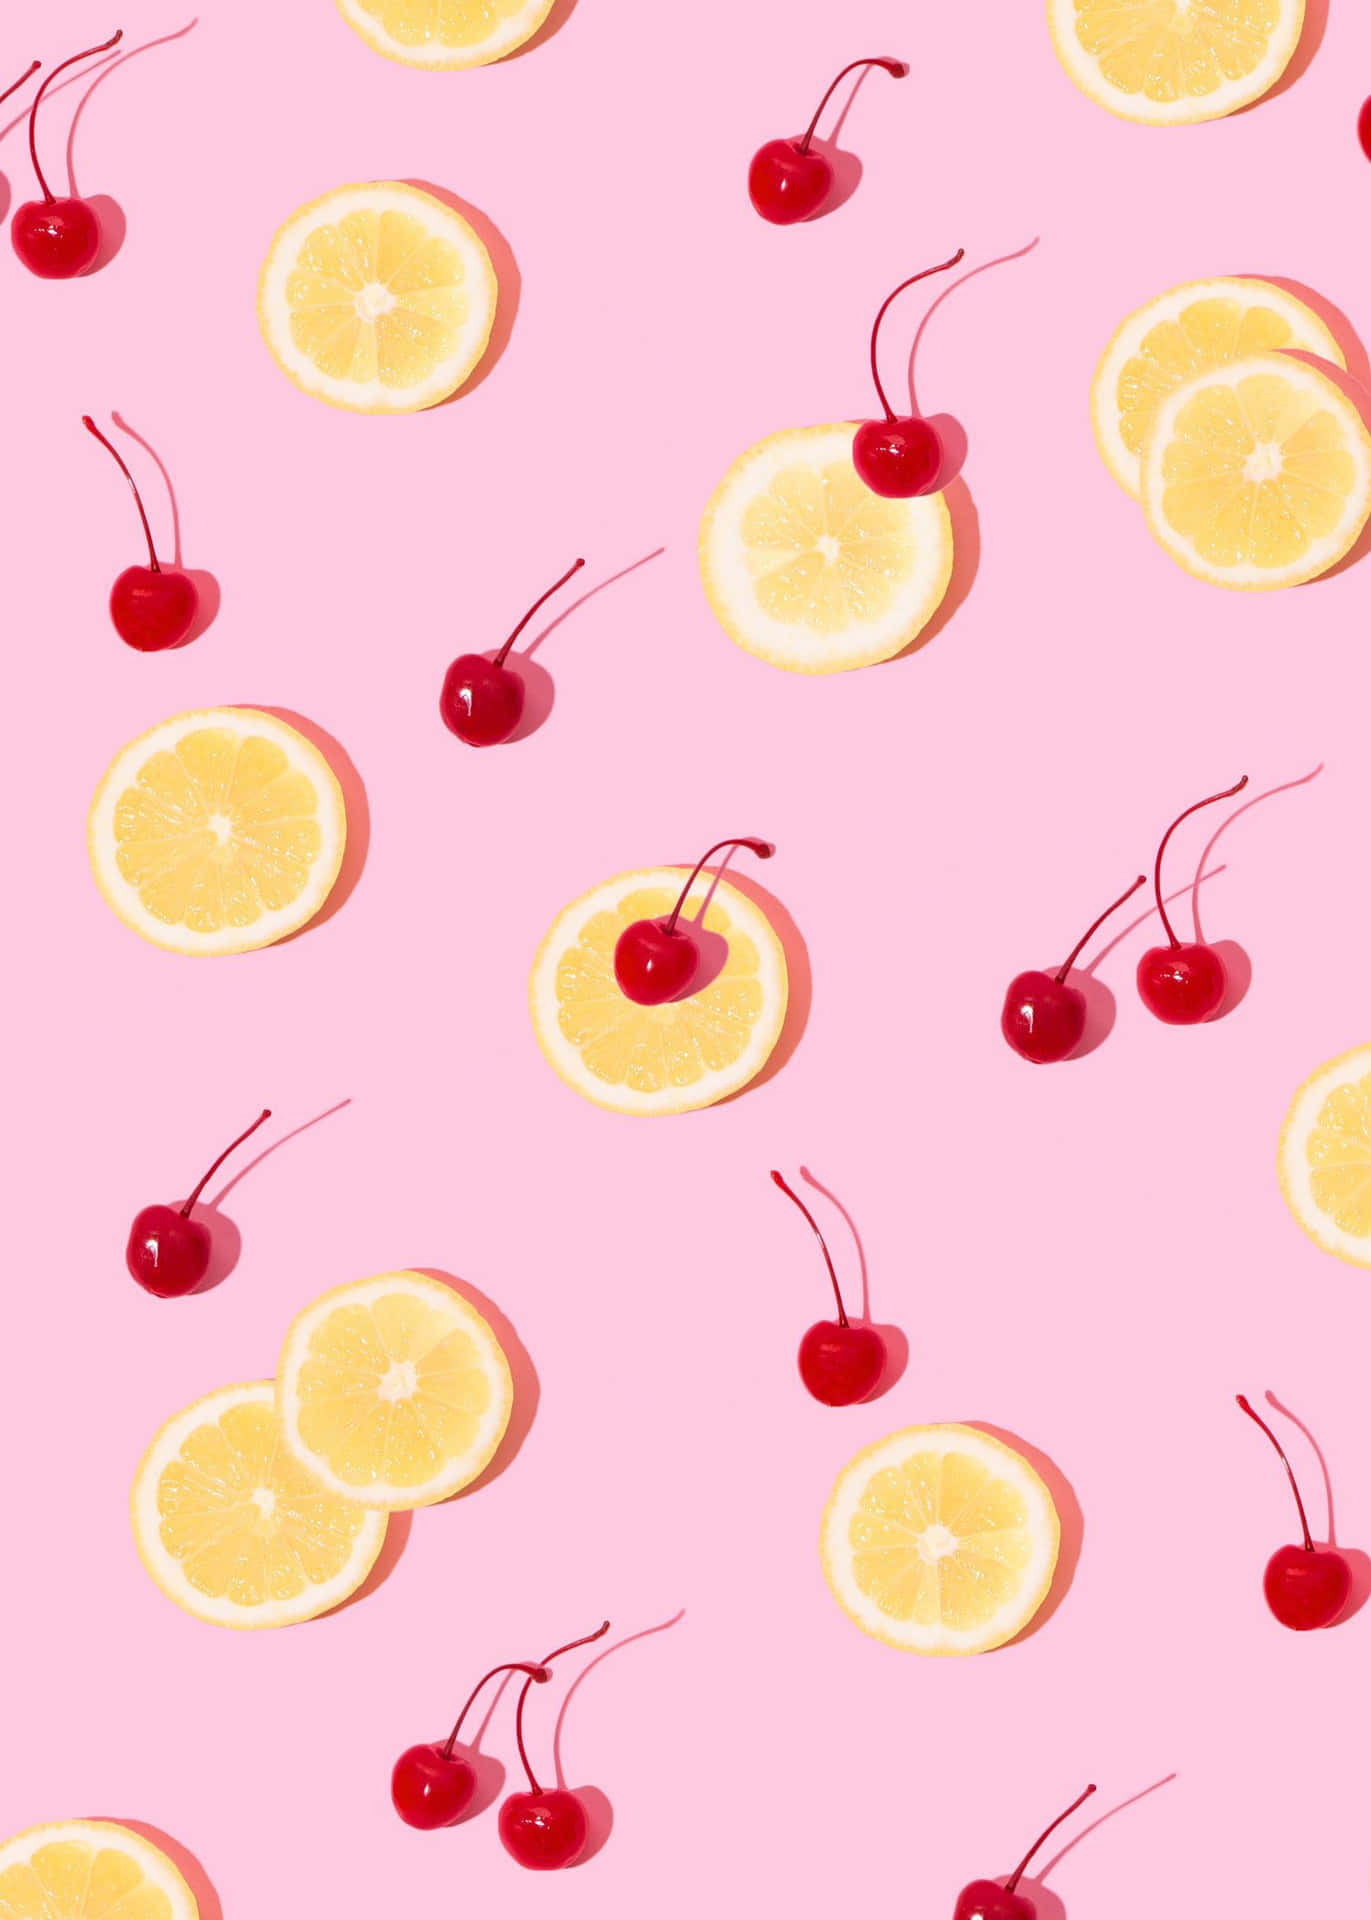 Fruit Background With Lemon Slices And Cherries